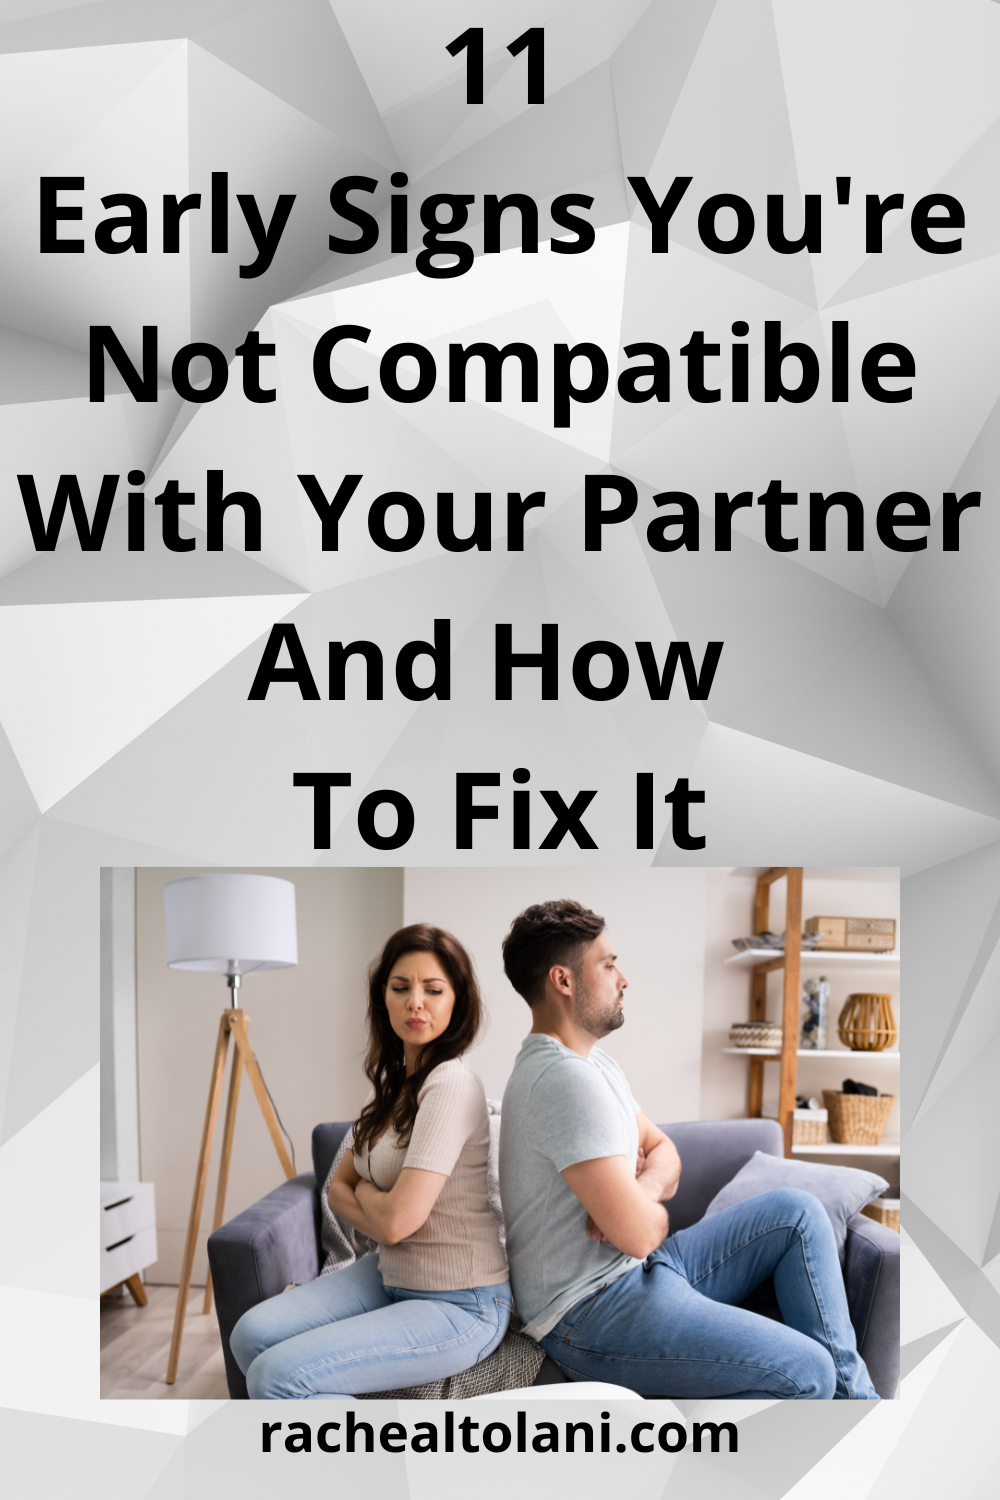 Early Signs You're Not Compatible with Your Partner